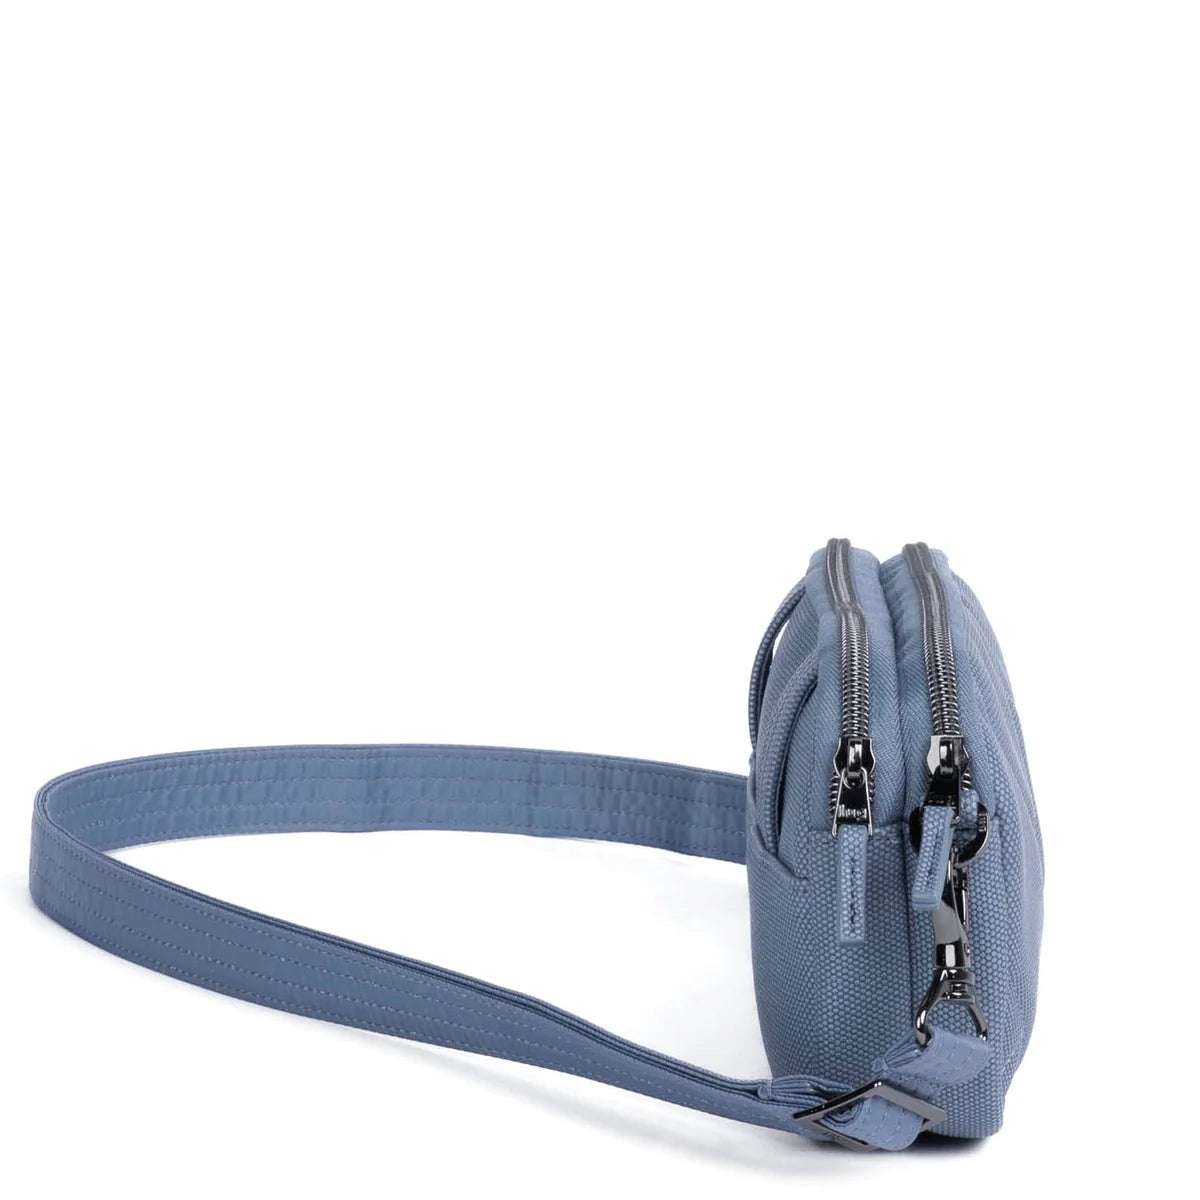 LUG Coupe Matte Luxe VL Convertible Crossbody Bag in Blue Moon